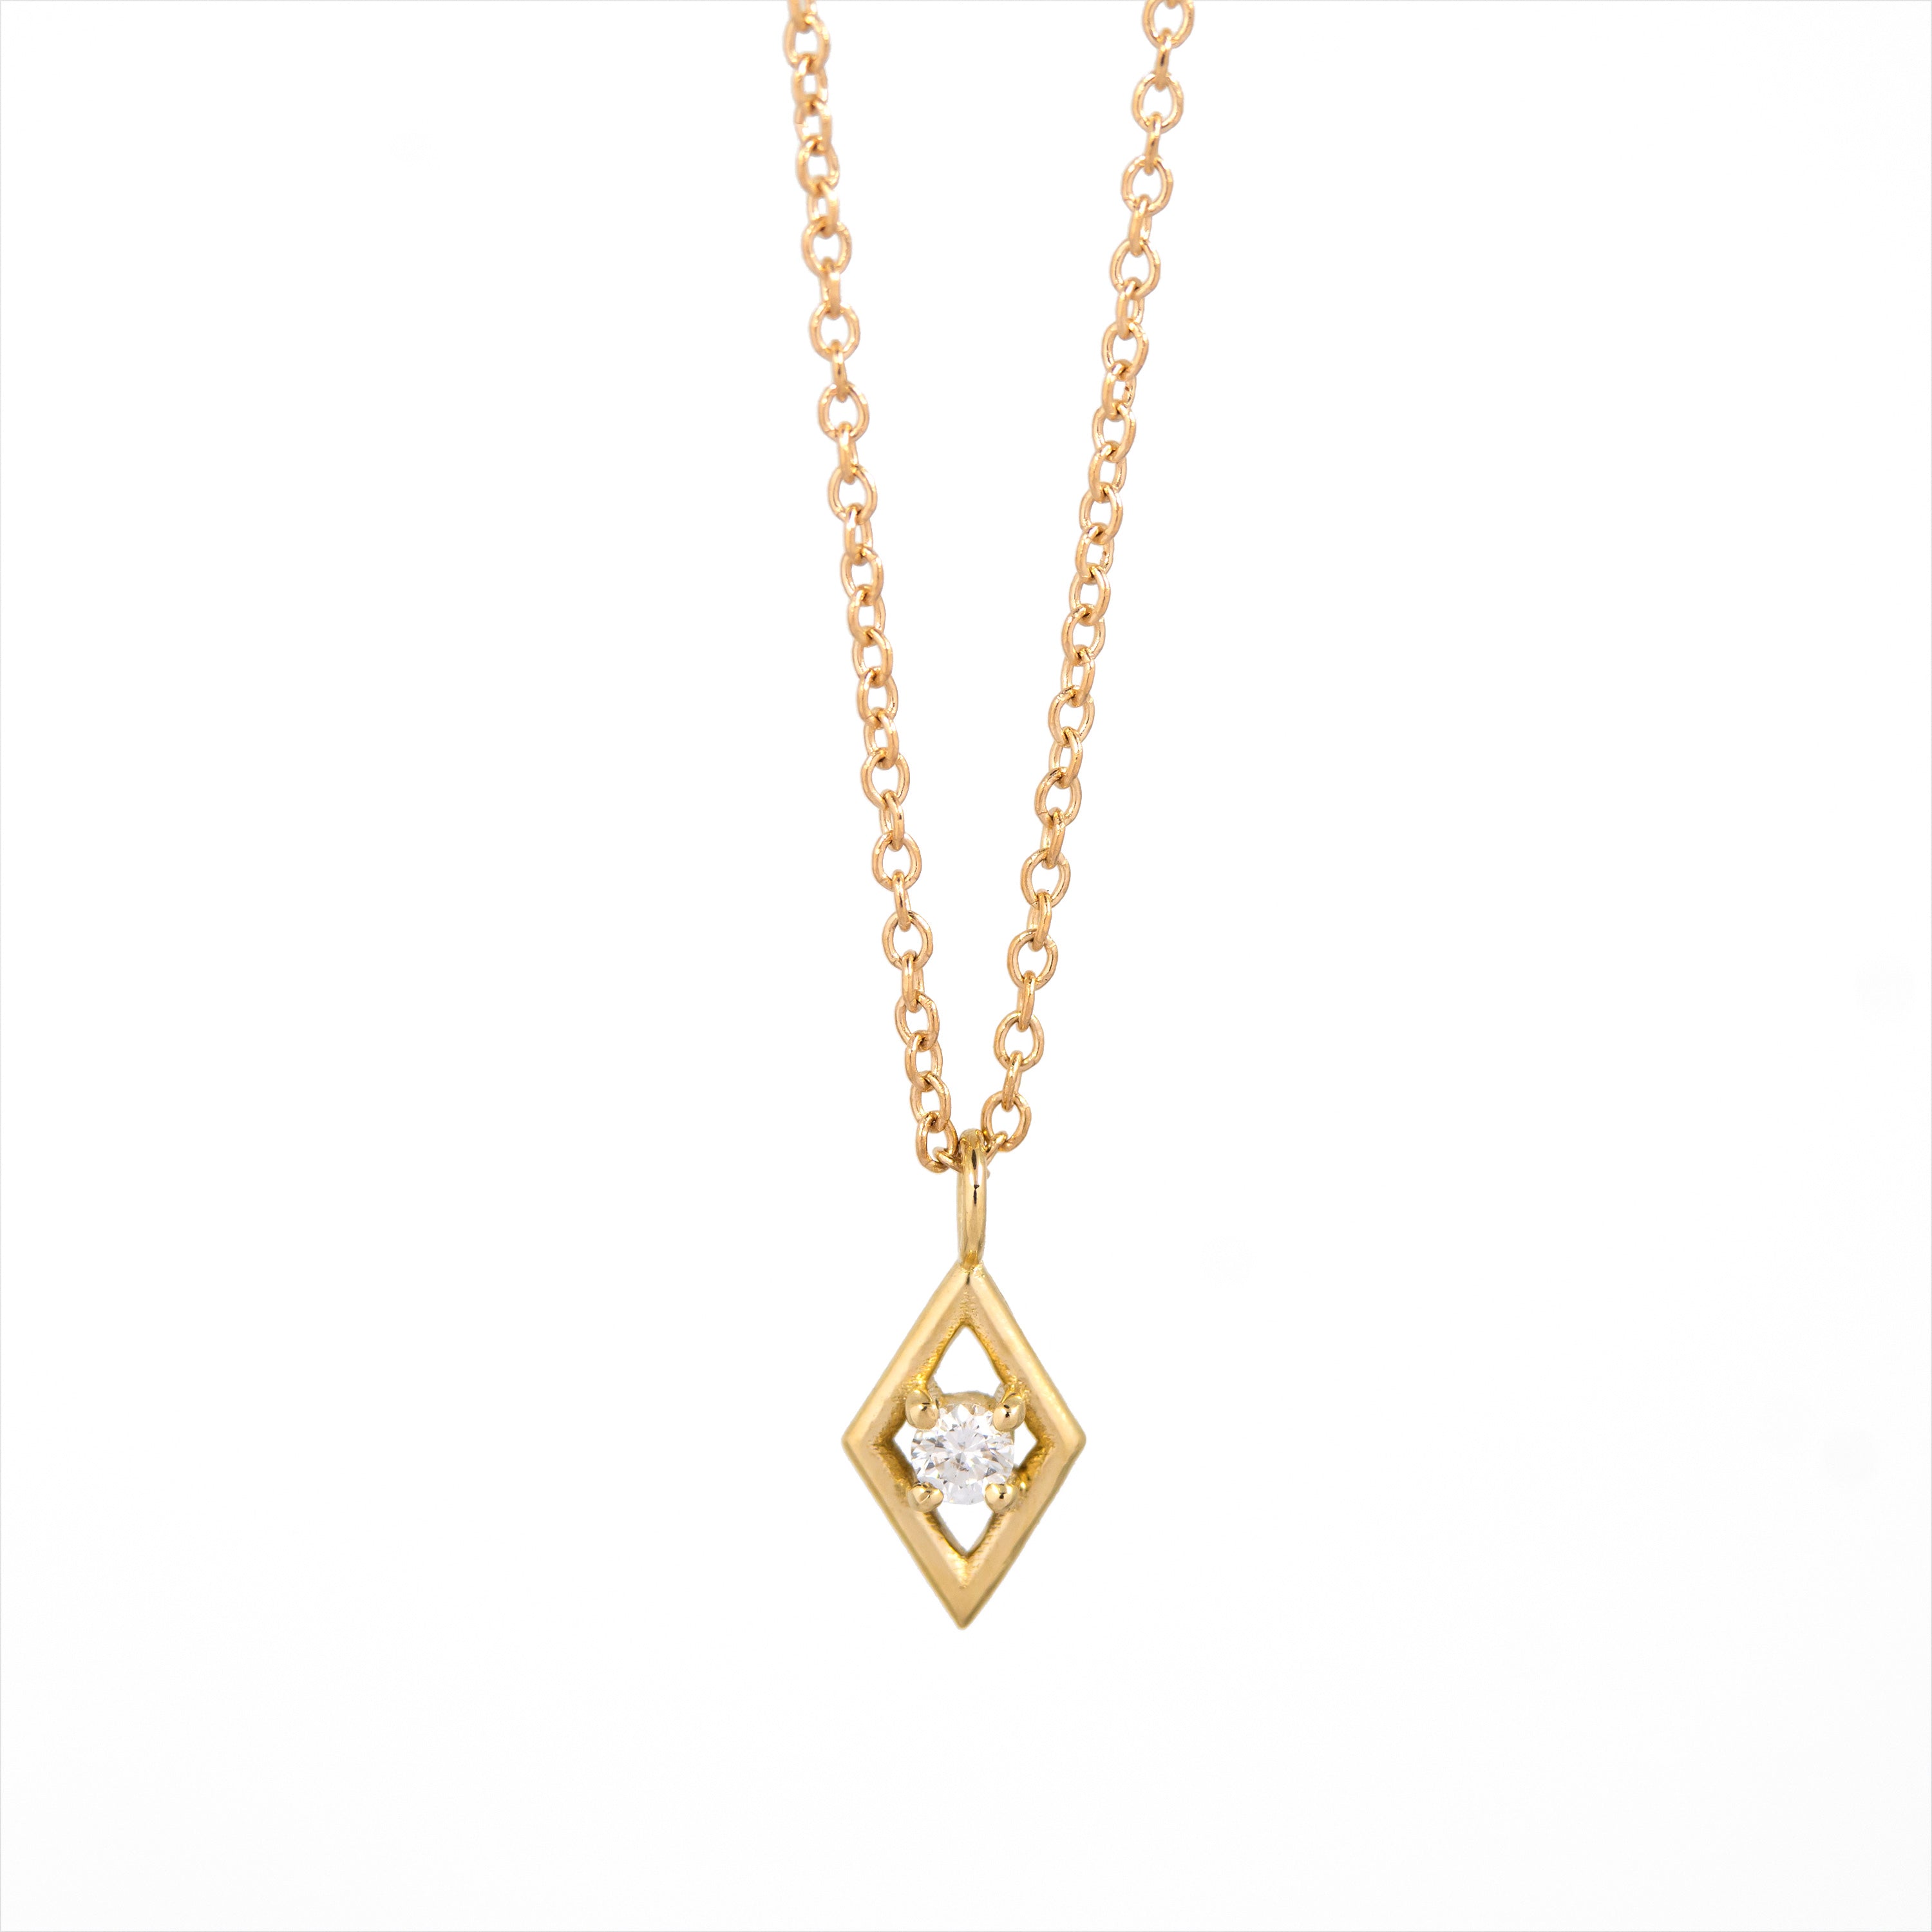 Rhombus Frame Necklace - 14k Yellow Gold